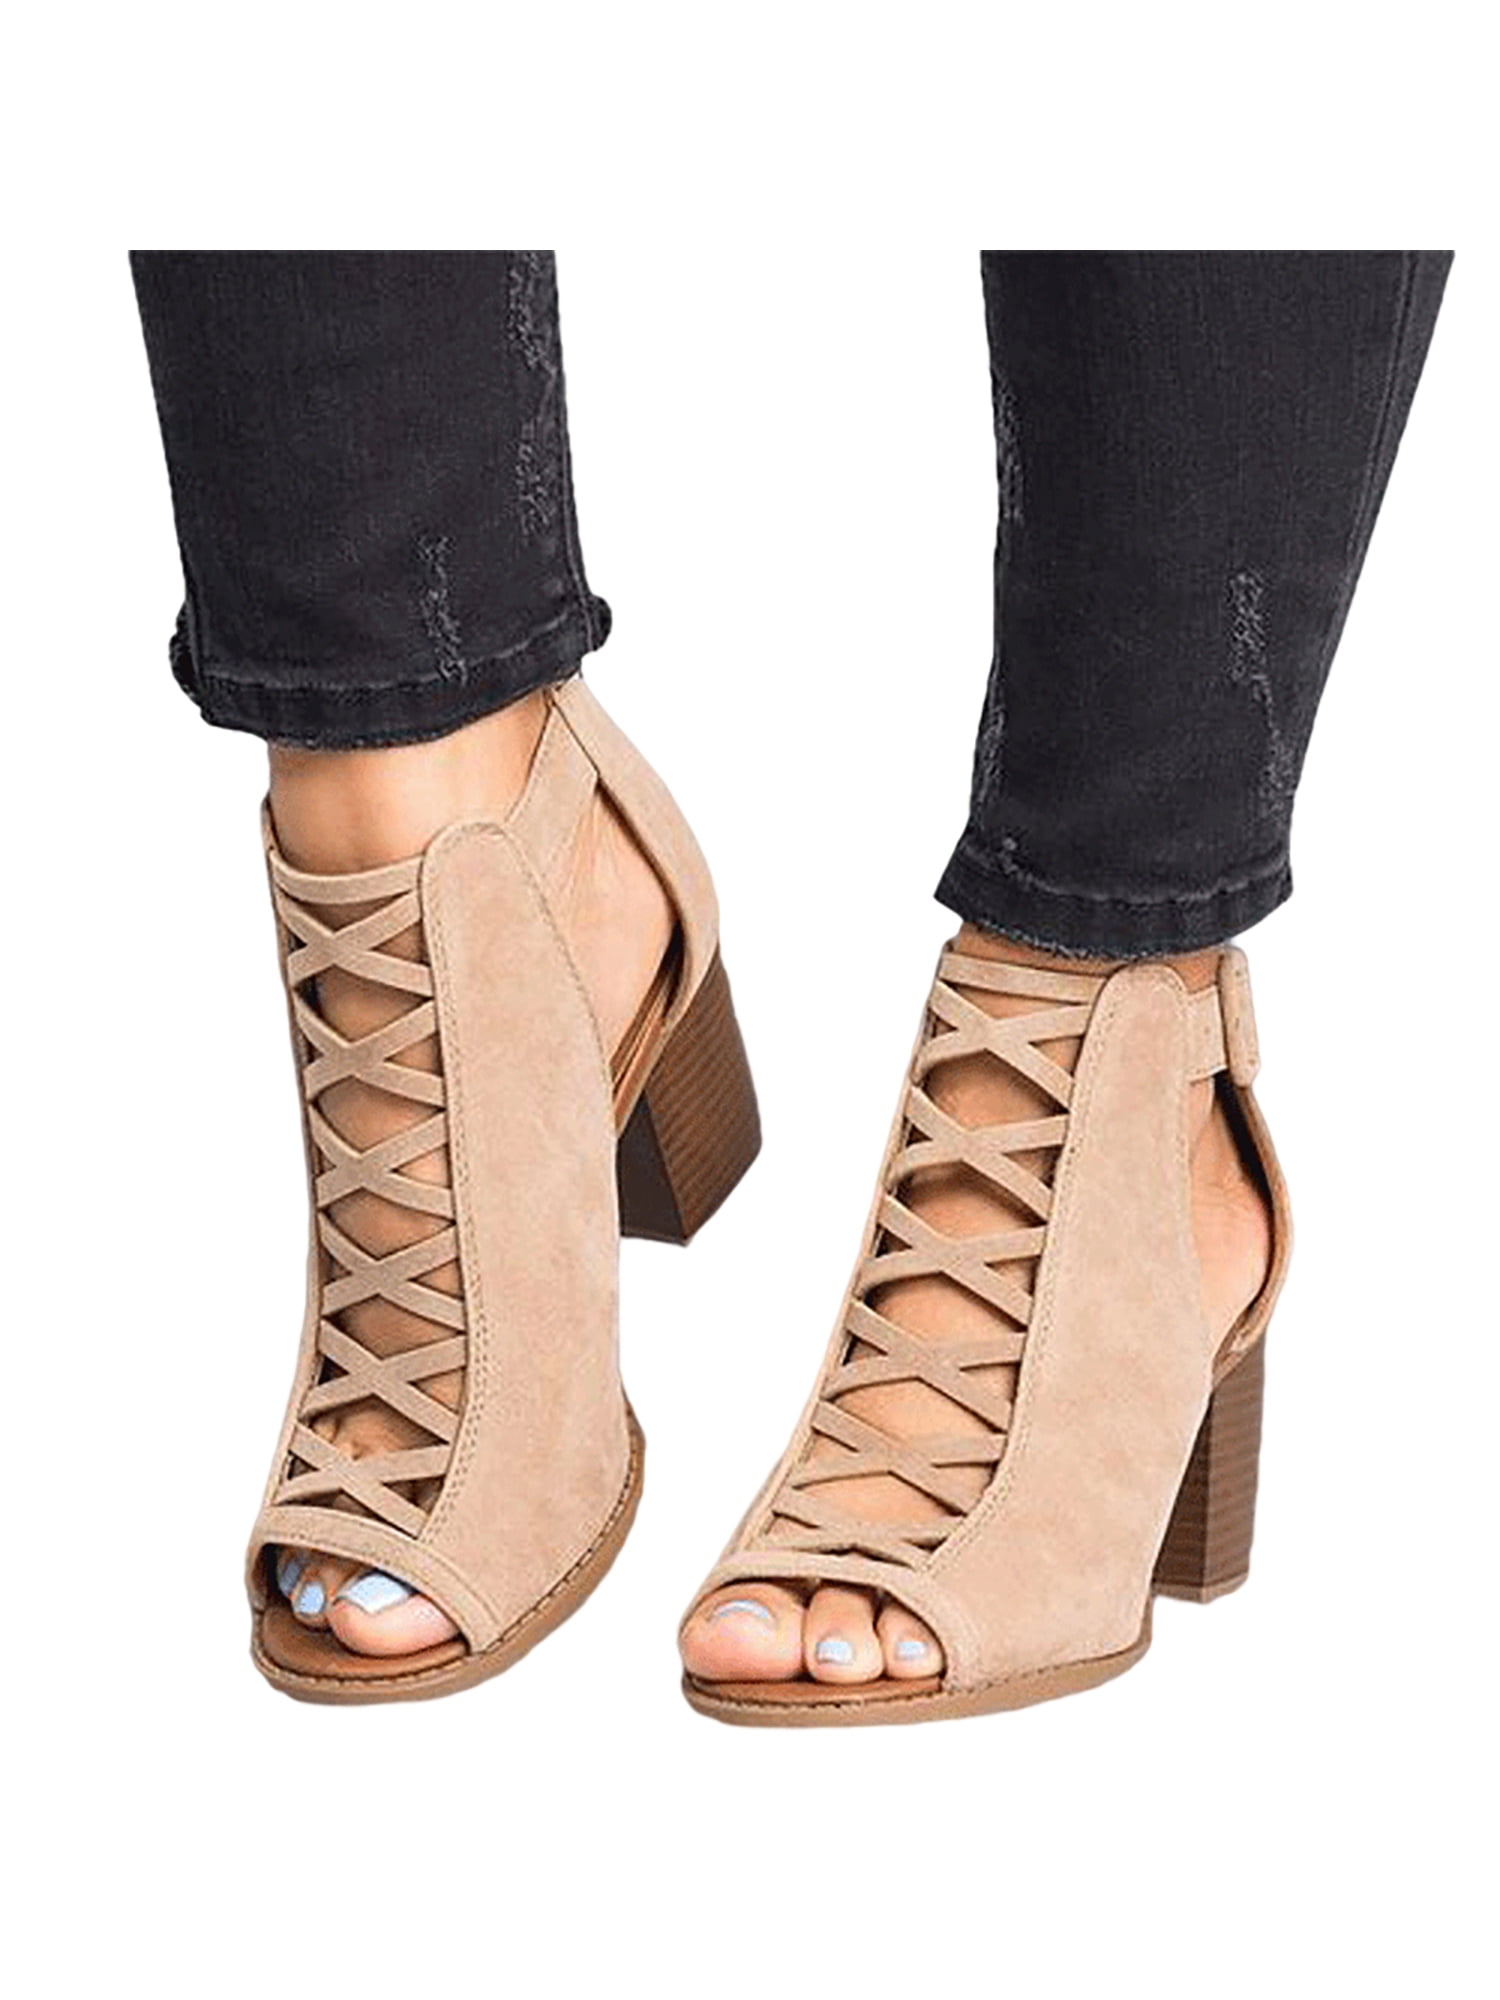 Women Block Mid Heels Sandals Peep Toe Chunky Buckle Ankle Strap Zip Boots Shoes 